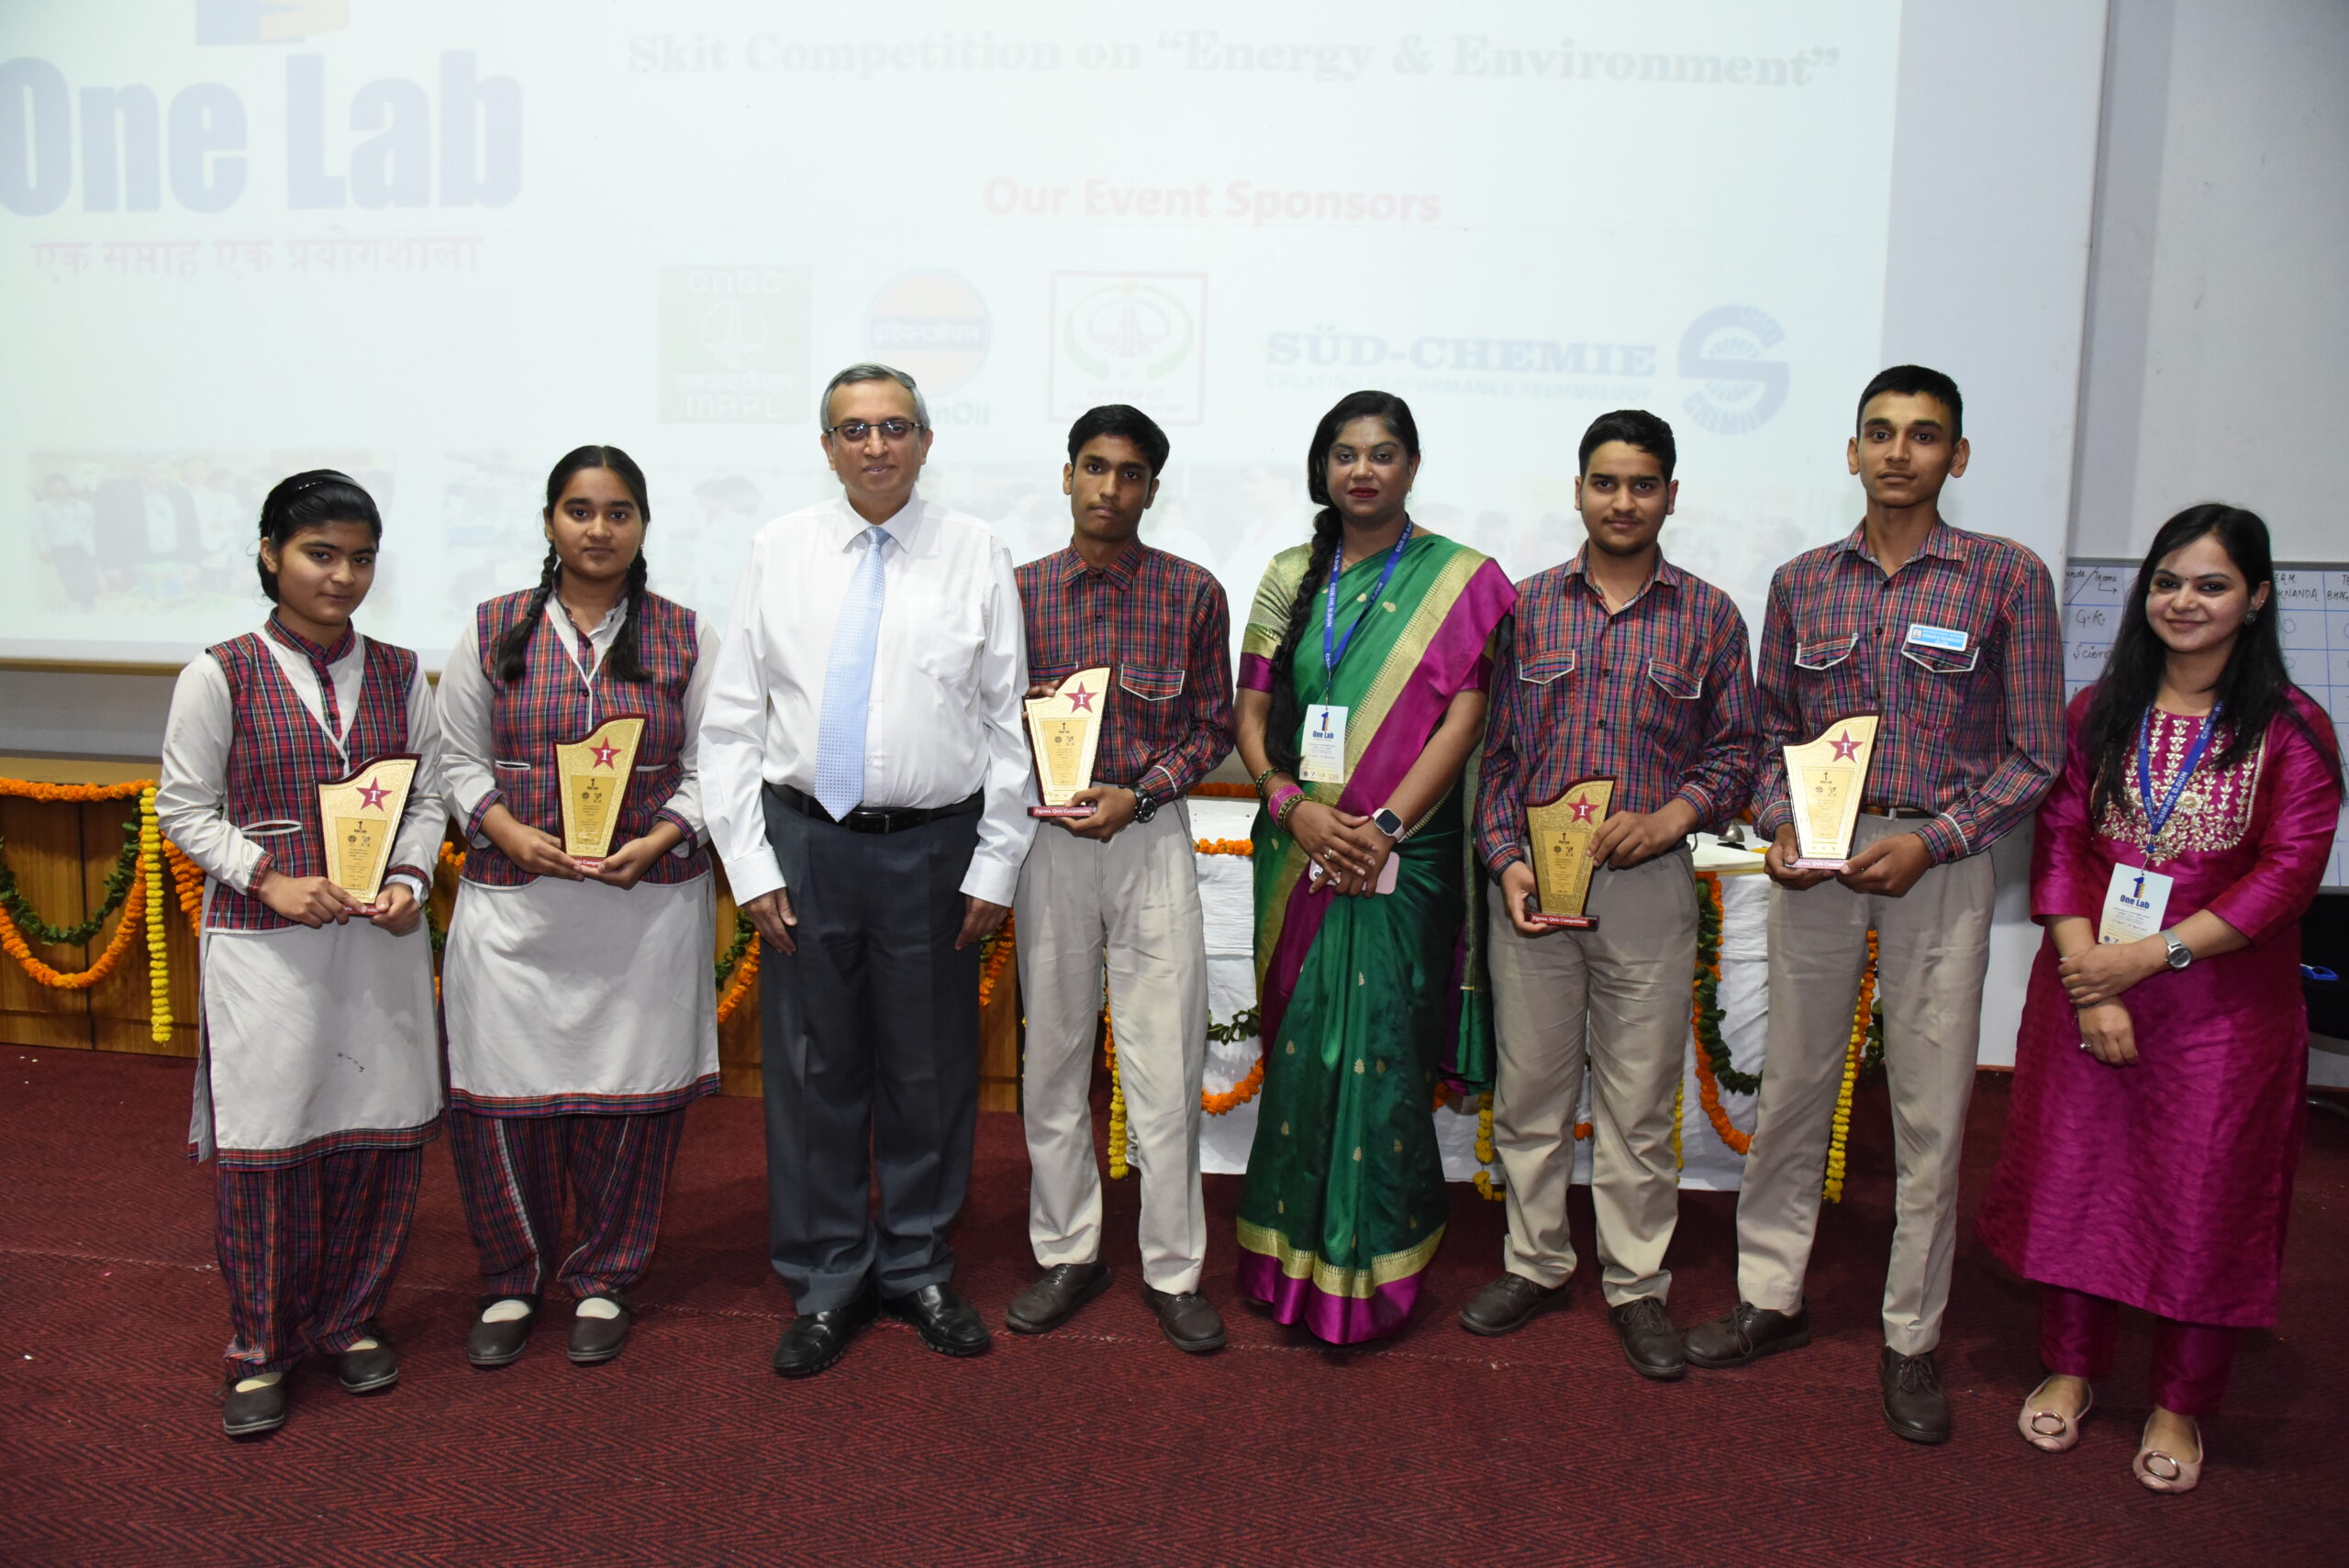 Students interact with scientific community